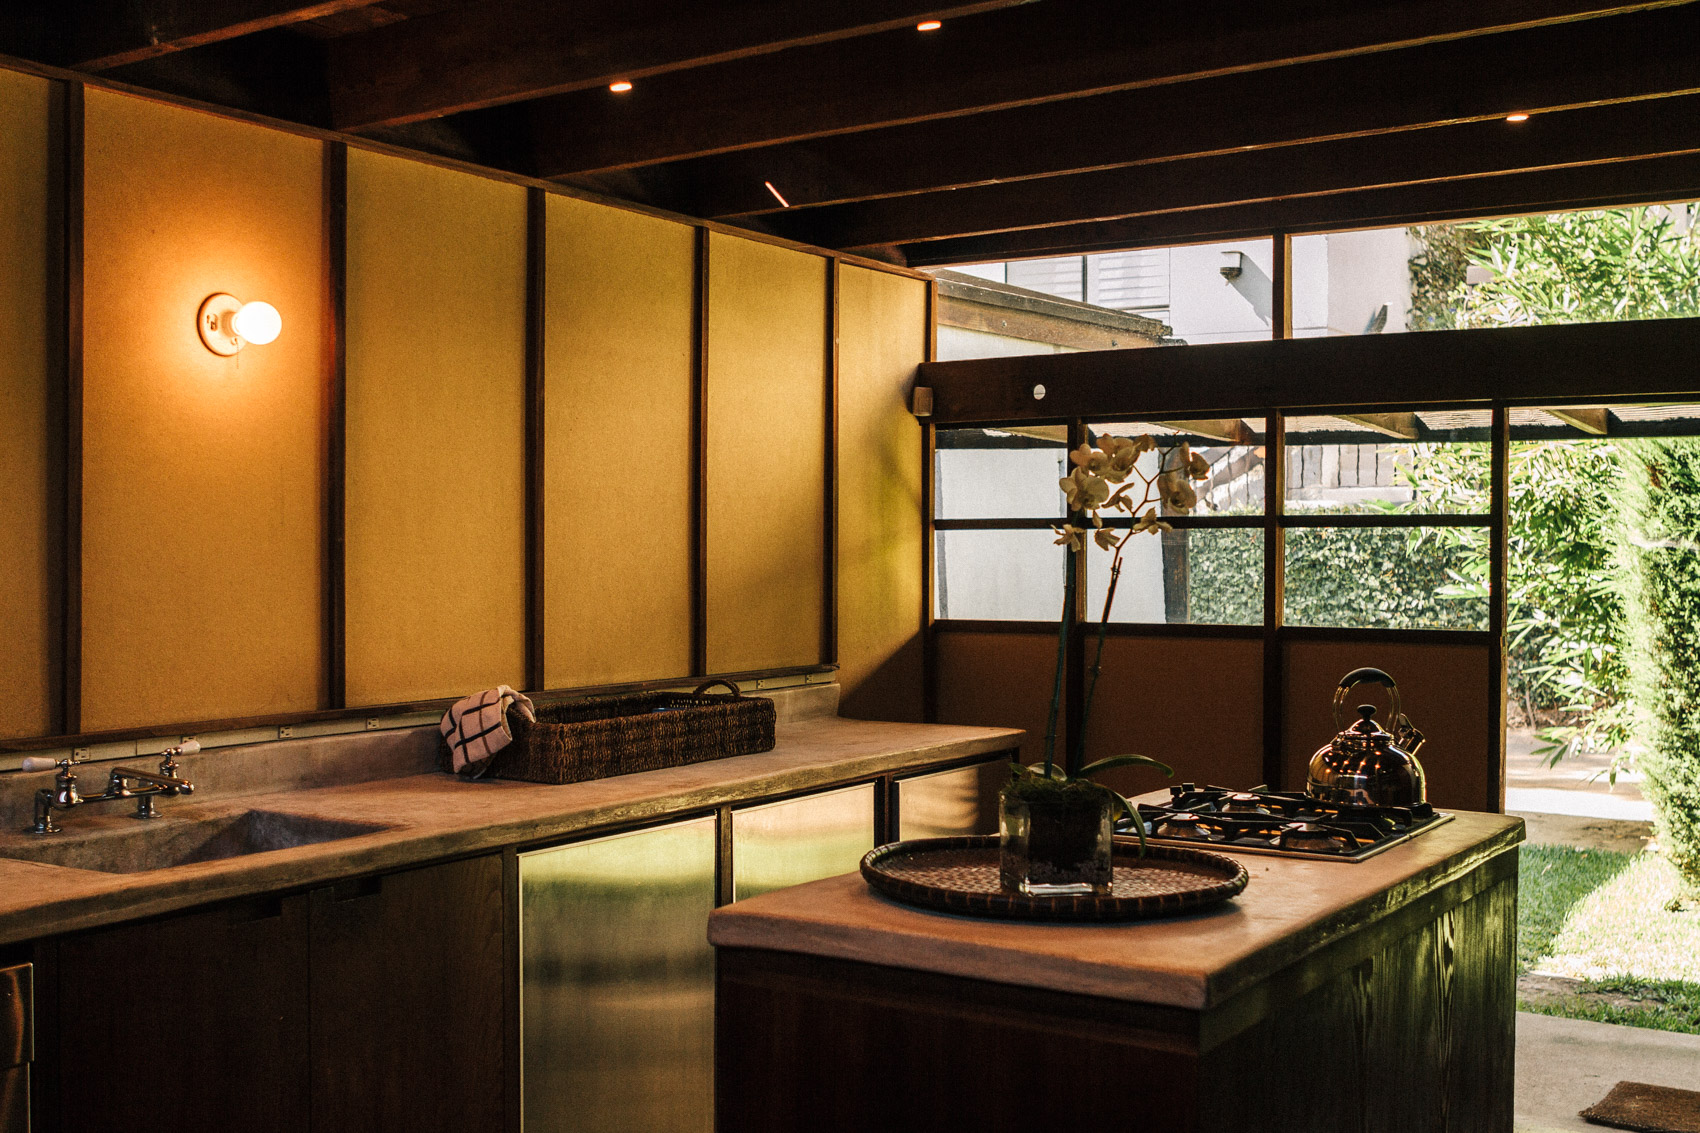 Kitchen space of the Schindler House in Los Angeles California